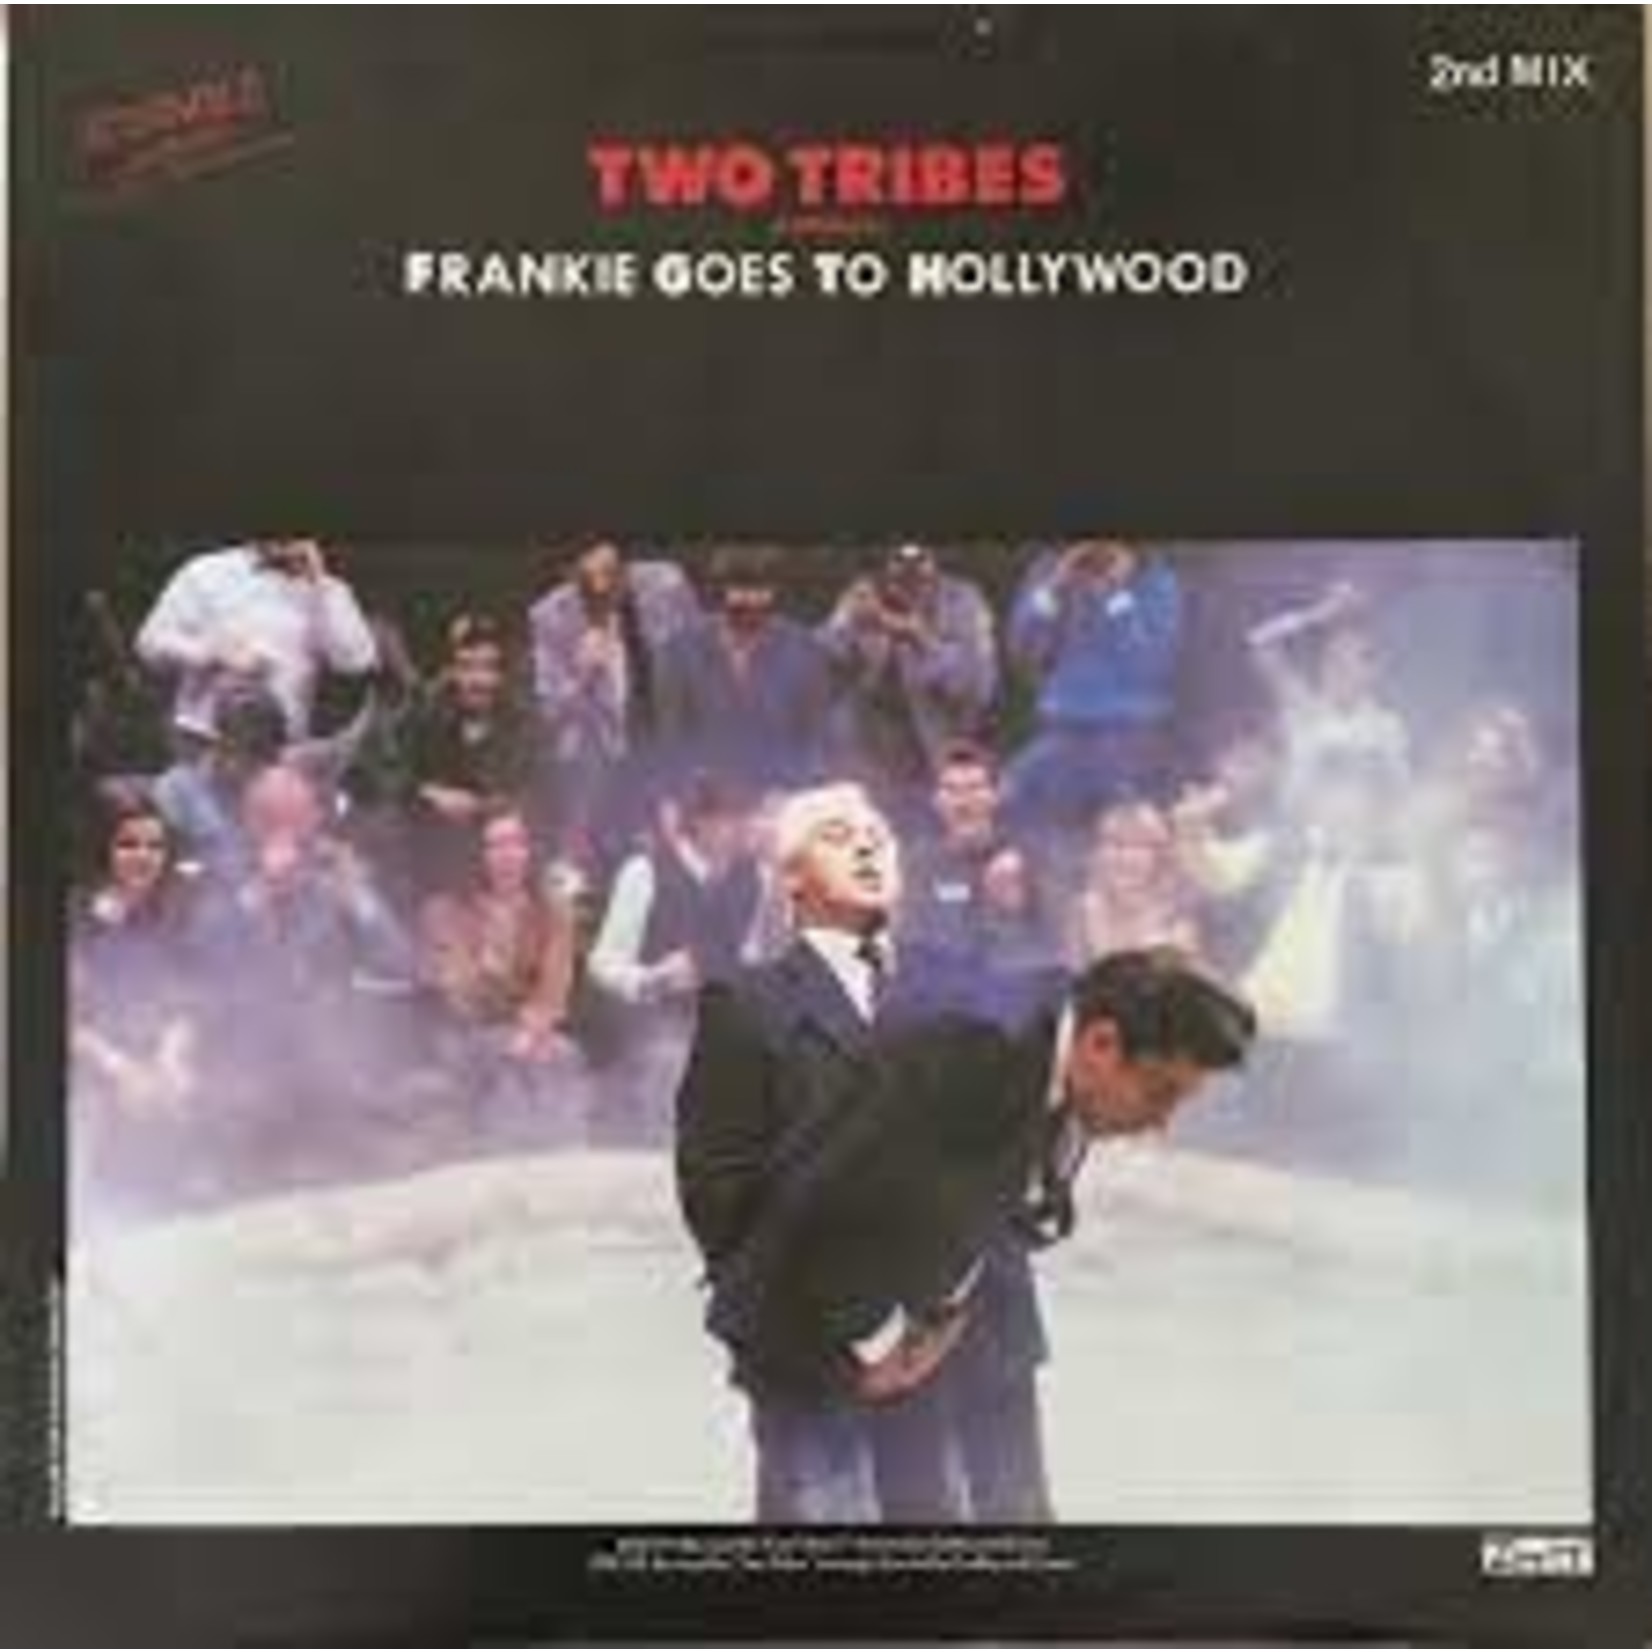 FRANKIE GOES TO HOLLYWOOD - two tribes 12"ep